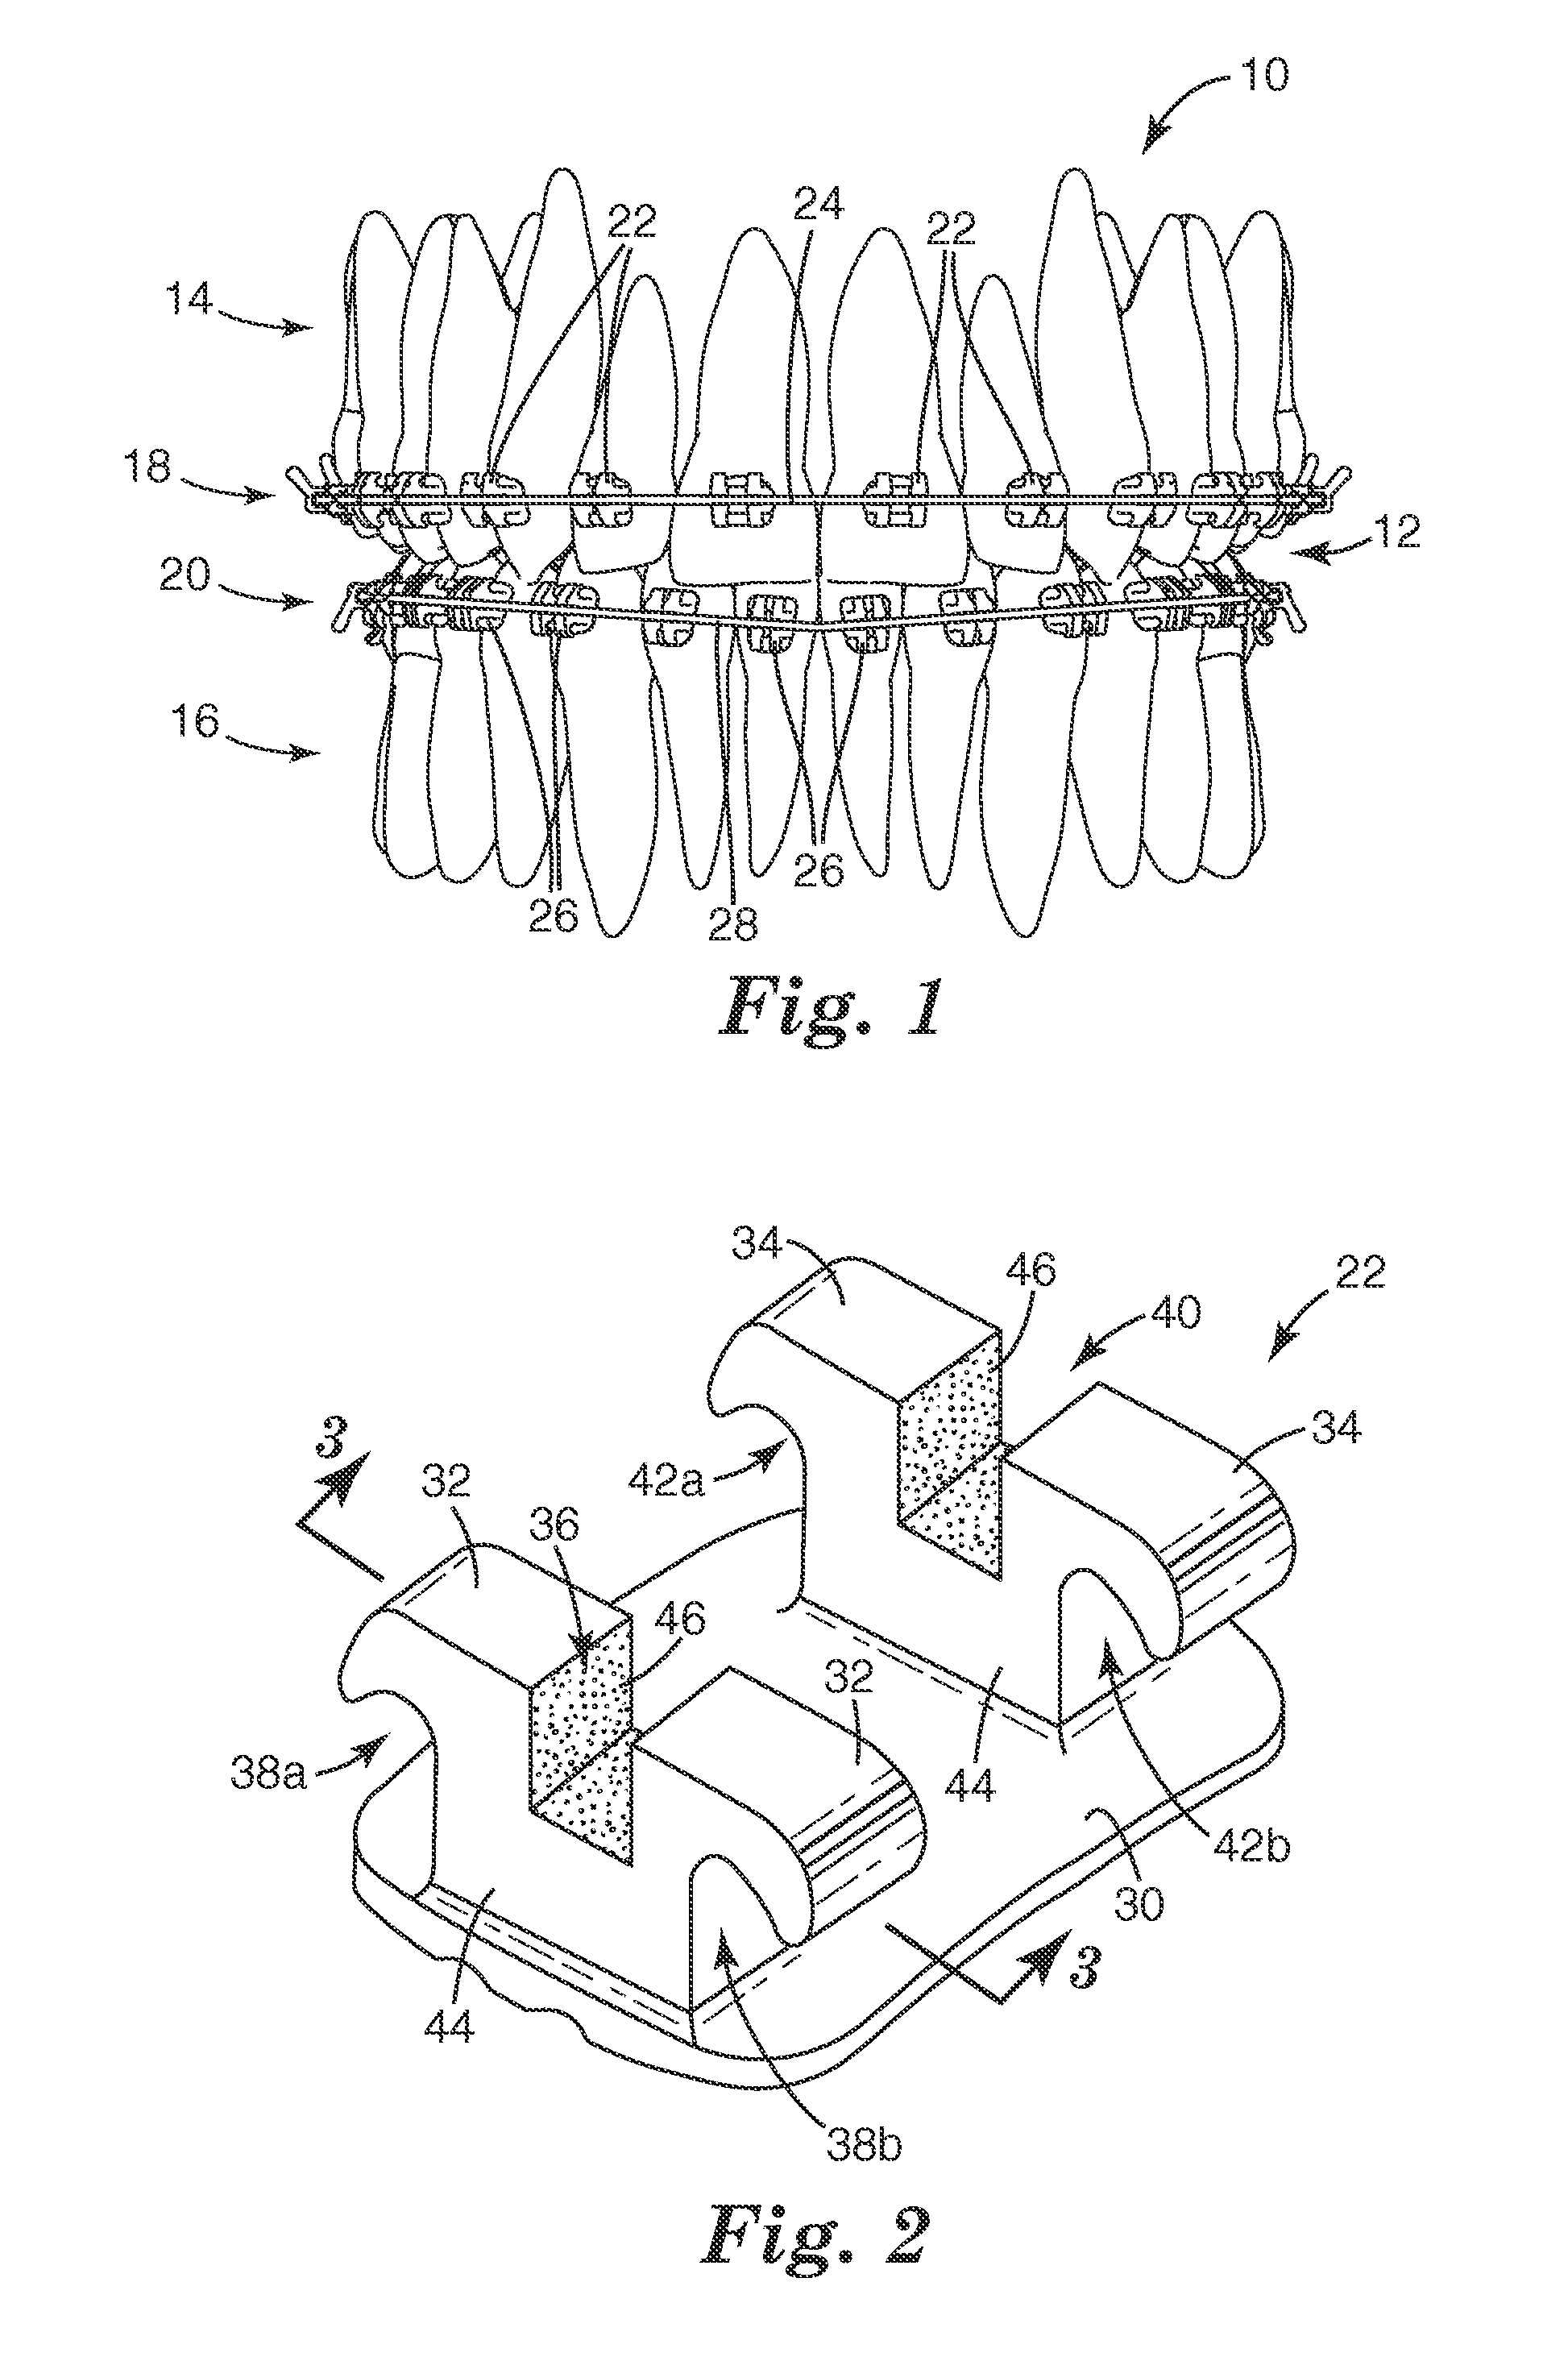 Coated Dental Articles and Related Methods of Manufacture